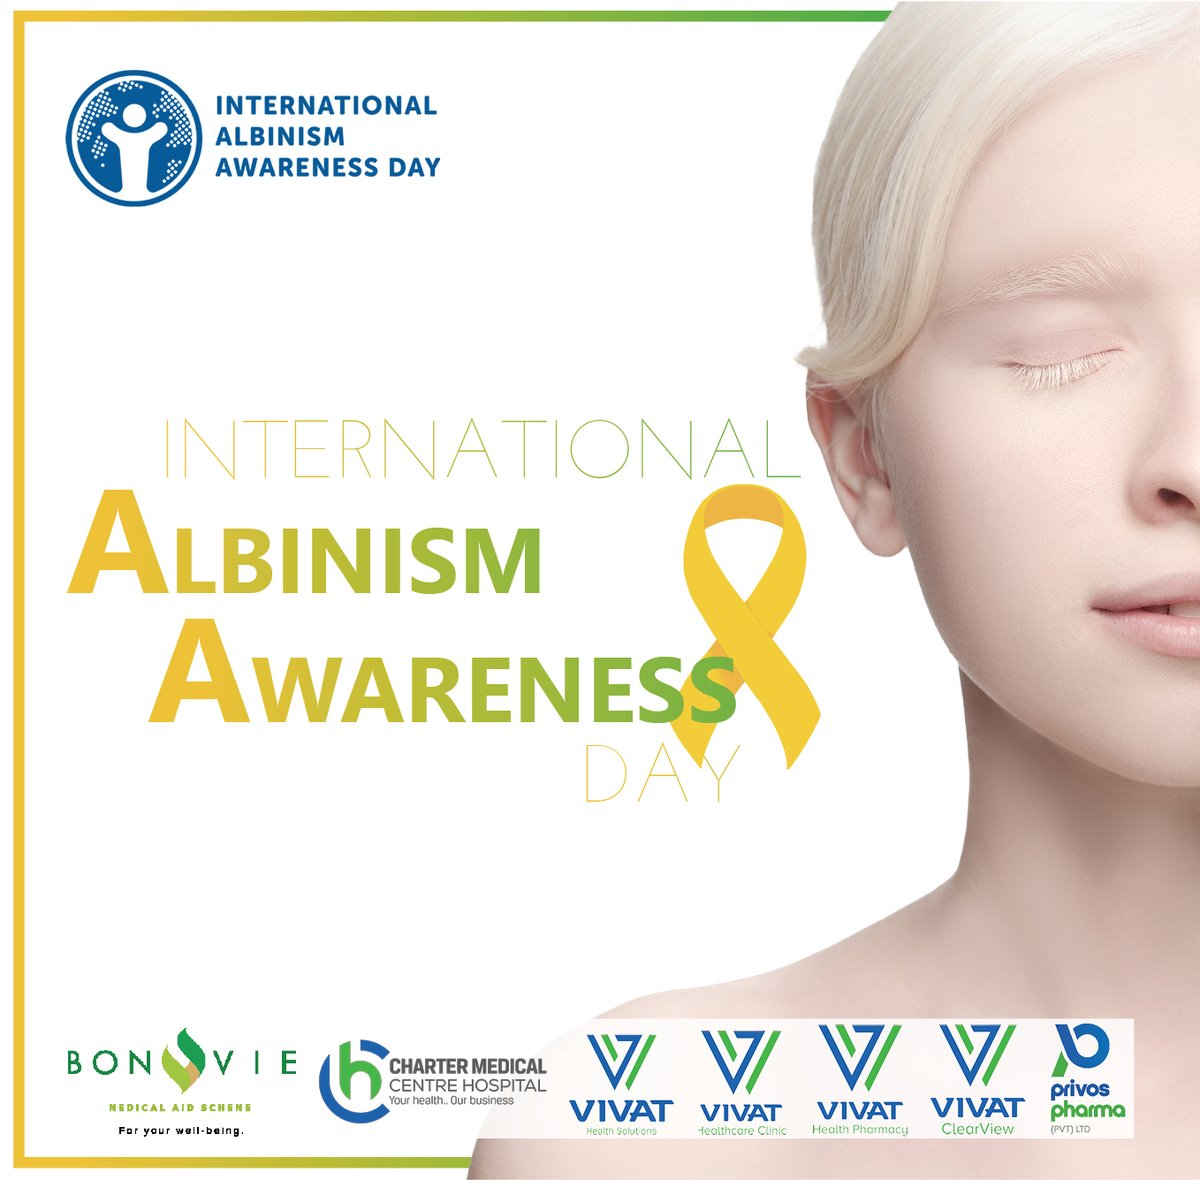 June 13th is International Albinism Awareness Day, a day to promote and protect the rights of people with albinism.     #InclusionIsStrength #InclusiveFuture #AlbinismDay